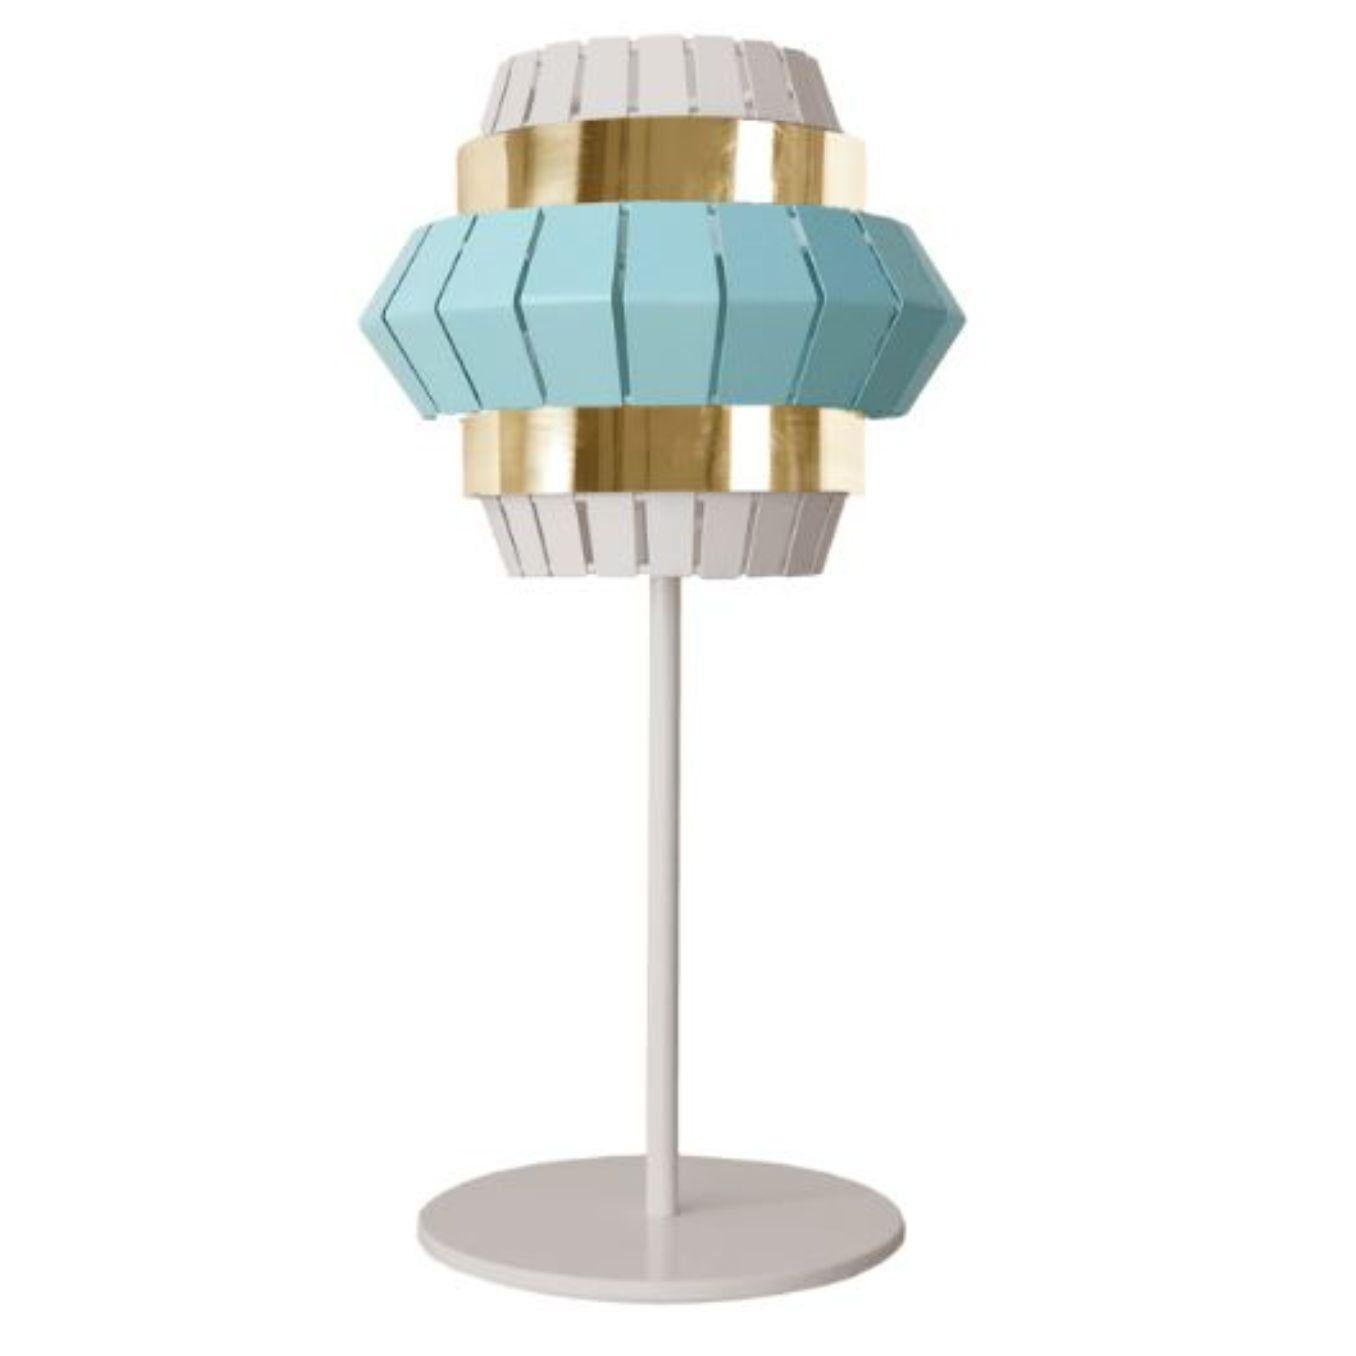 Ivory and Jade comb table lamp with brass ring by Dooq
Dimensions: W 25.5 x D 25.5 x H 60 cm
Materials: lacquered metal, polished brass.
Also available in different colors and materials.

Information:
230V/50Hz
E14/1x20W LED
120V/60Hz
E12/1x15W